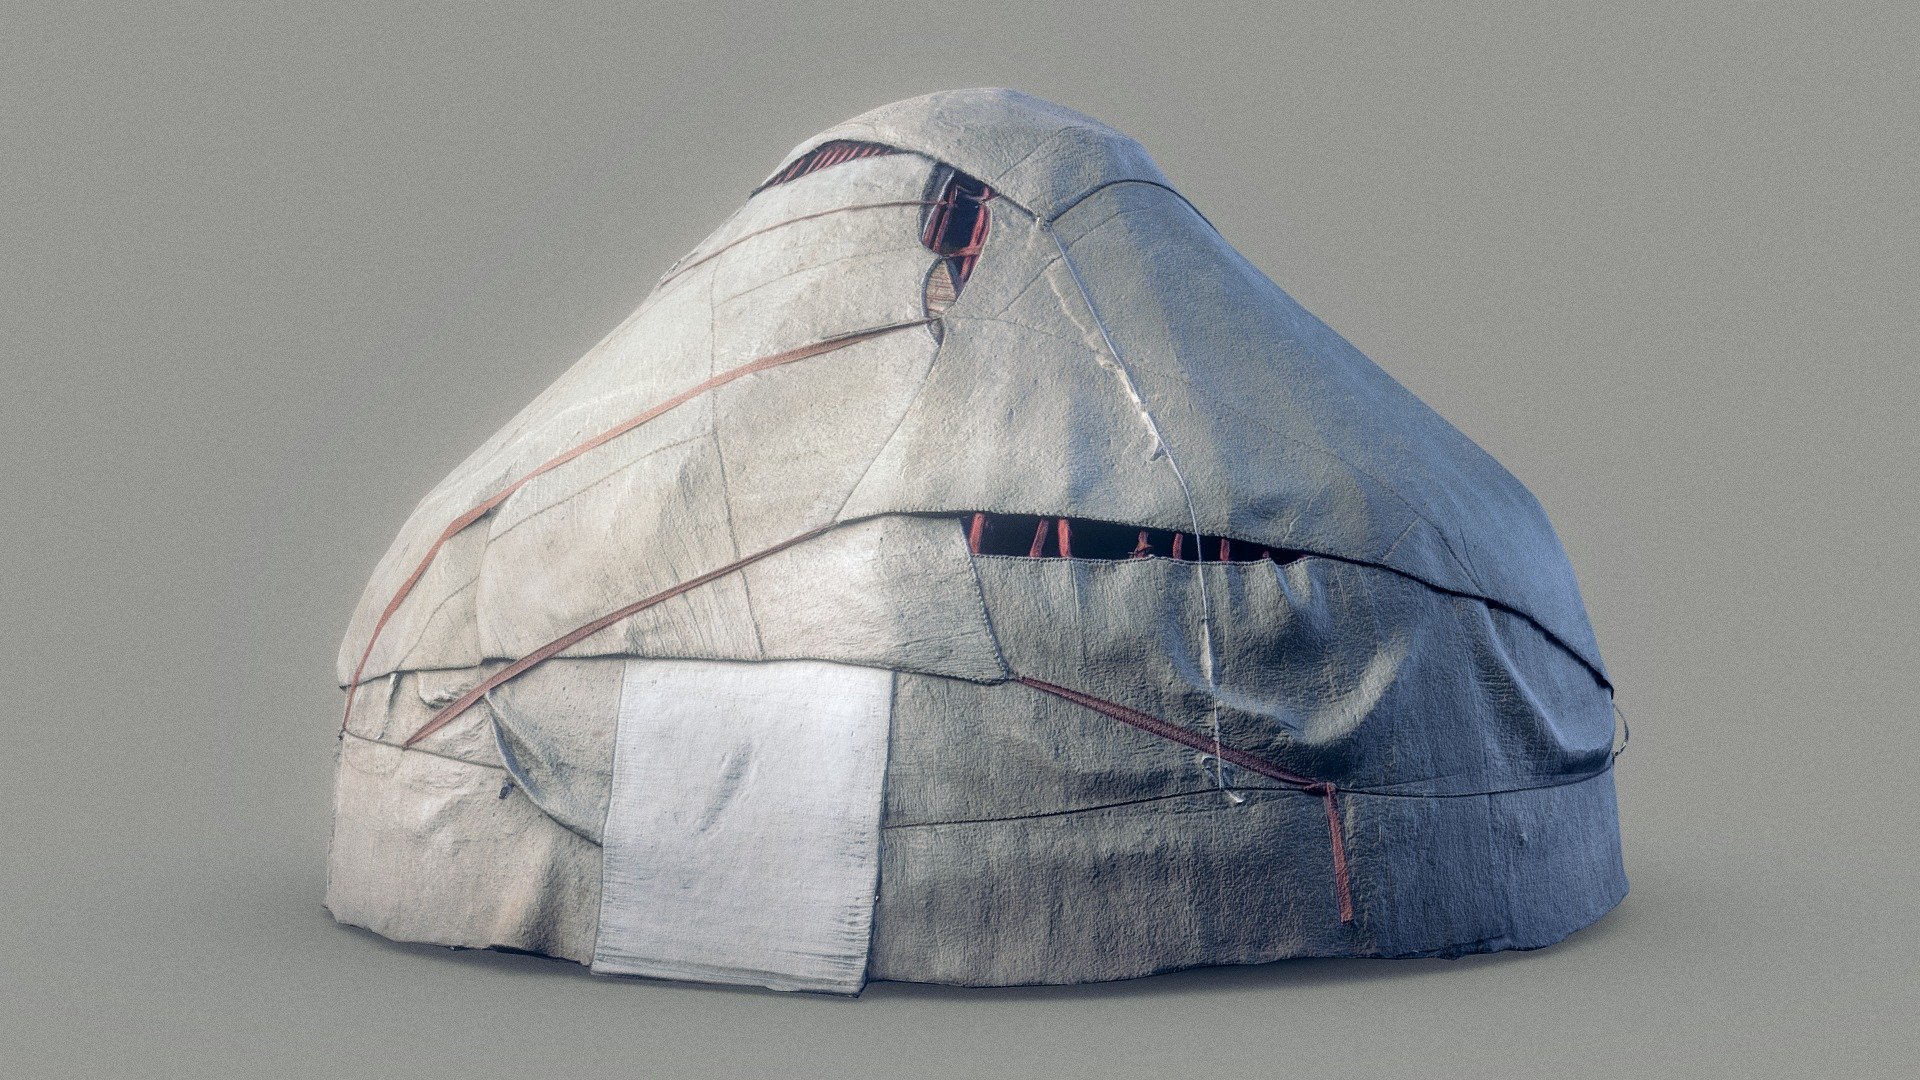 This Yurt is a high end, photorealistic 3D model, that is created to help you add the realism to your project.

The model is suitable for any visual production - broadcast, high-res film close-ups, advertising, games, design visualization, forensic presentation, animated movie production, still illustration etc.

Model has clean optimized topology 3d model